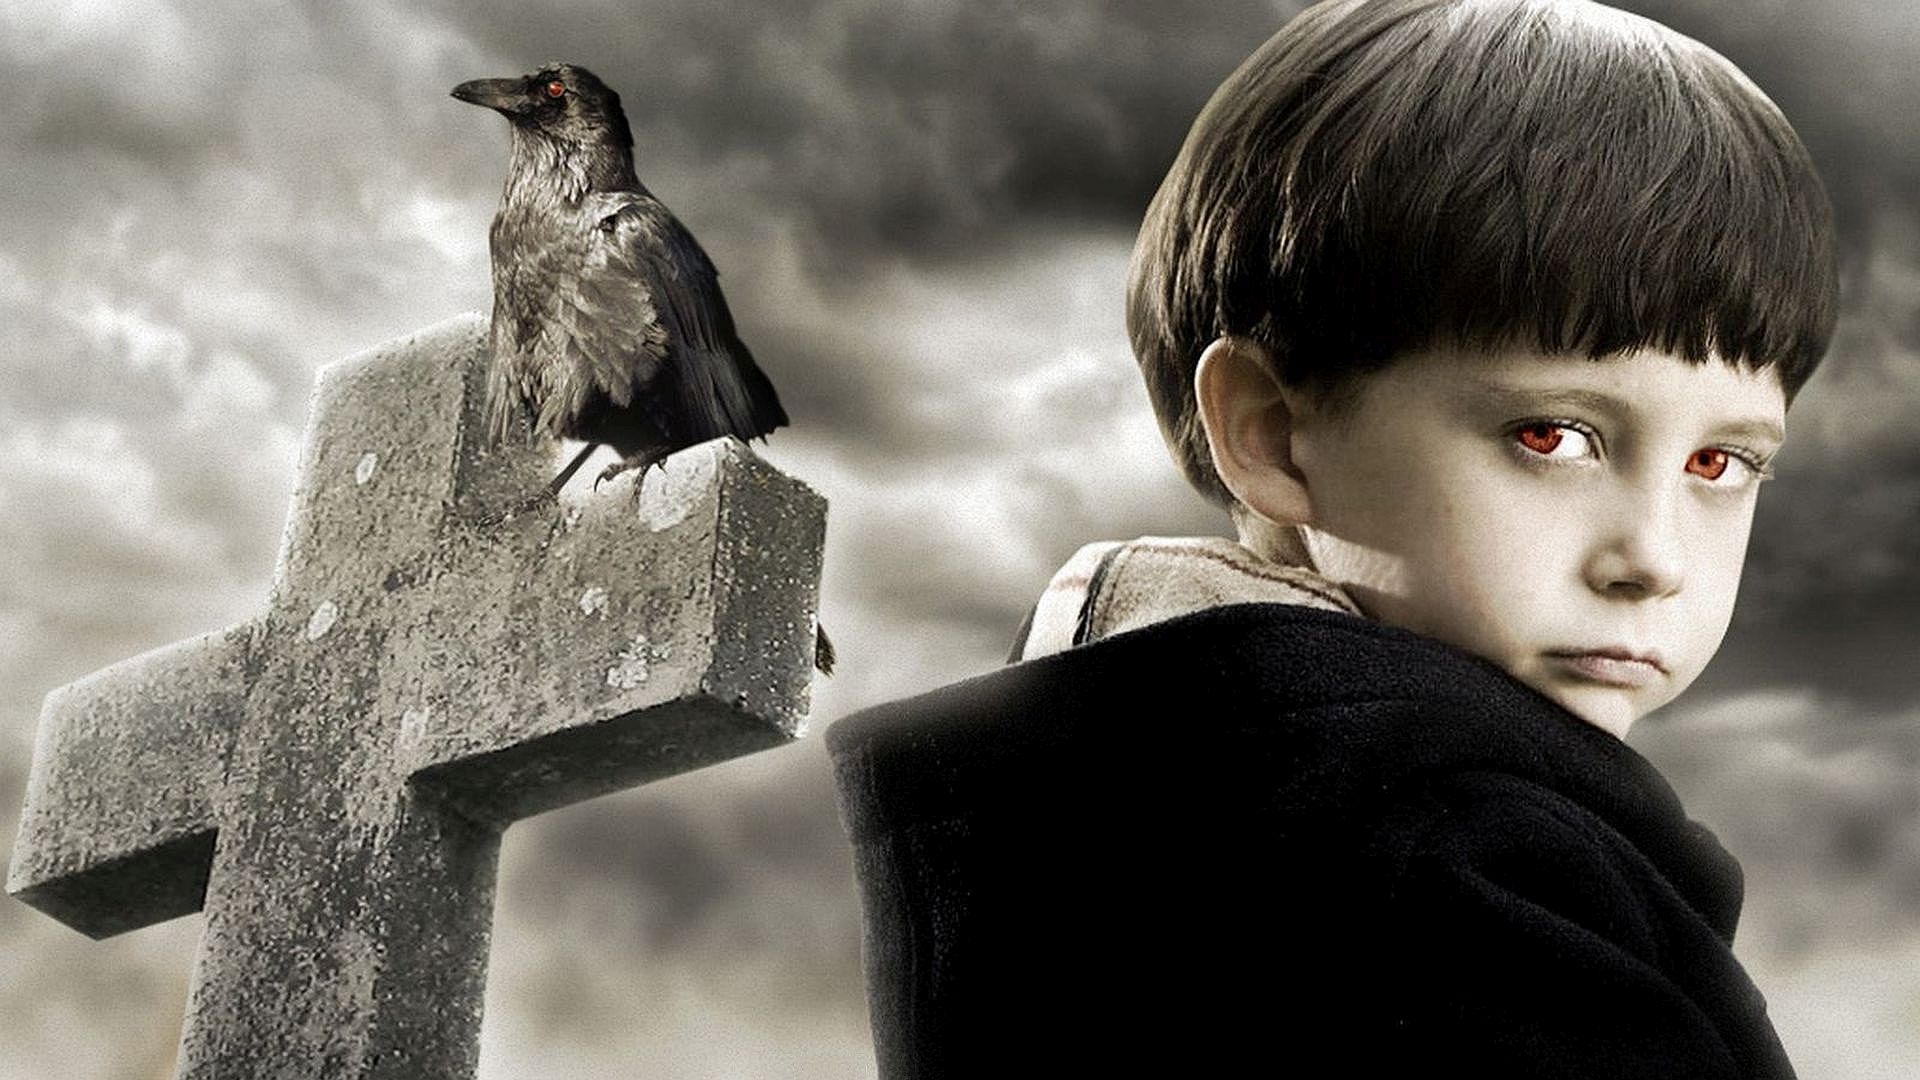 Movie The Omen (2006) HD Wallpaper | Background Image